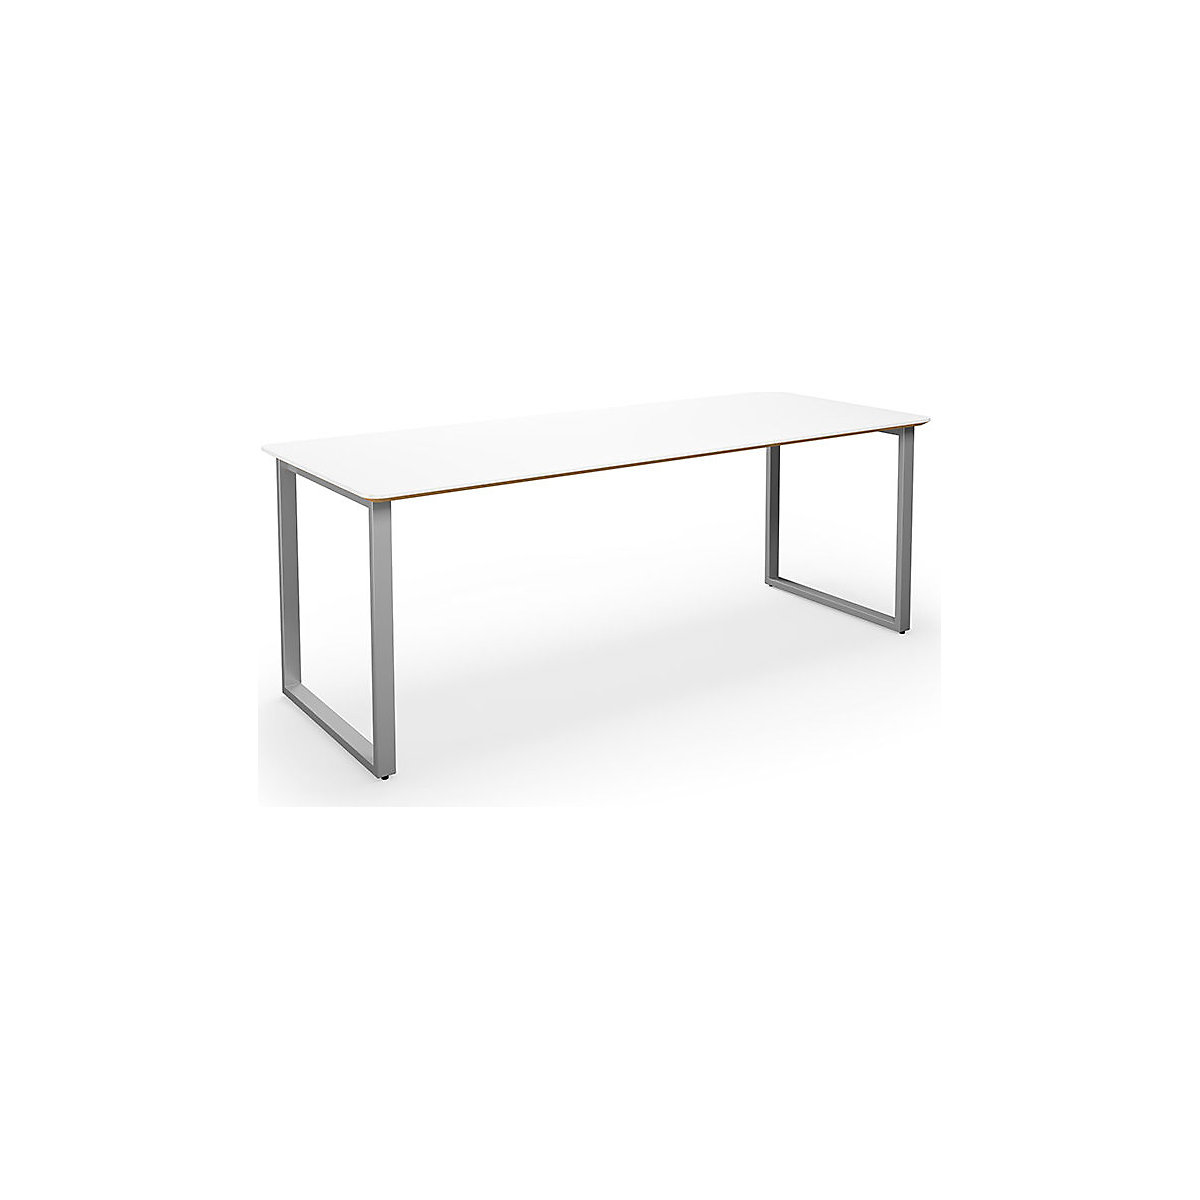 DUO-O Trend multi-purpose desk, straight tabletop, rounded corners, WxD 2000 x 800 mm, white, silver-1